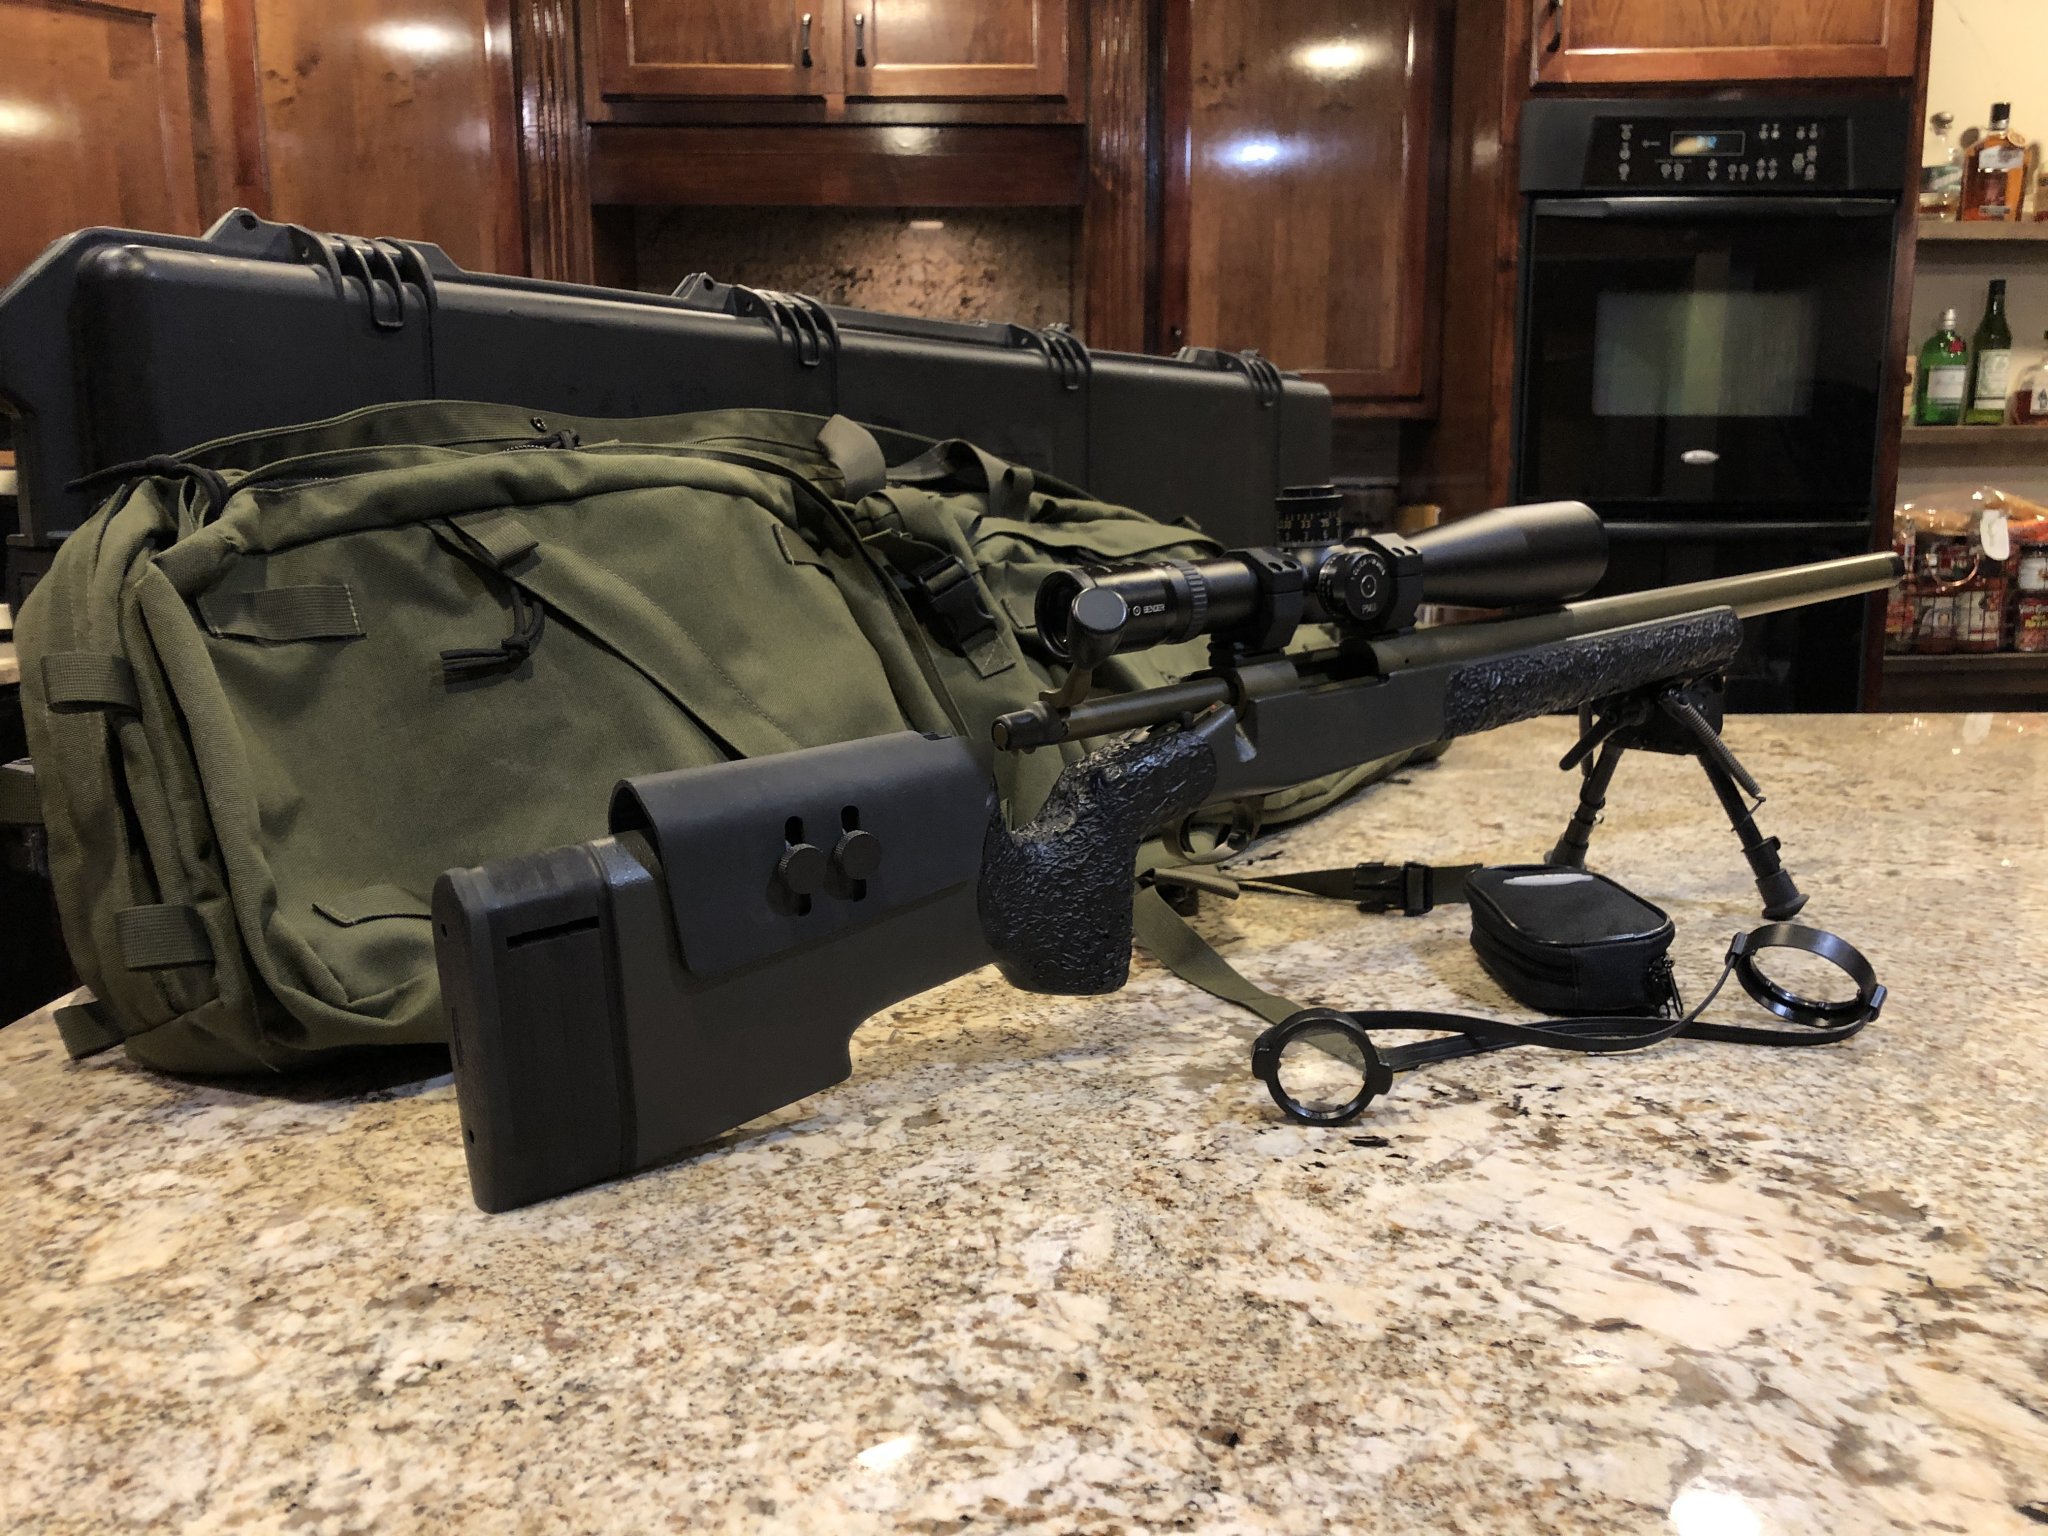 Firearms - For Sale: Tac Ops X-Ray 51, Schmidt & Bender PMII, and 